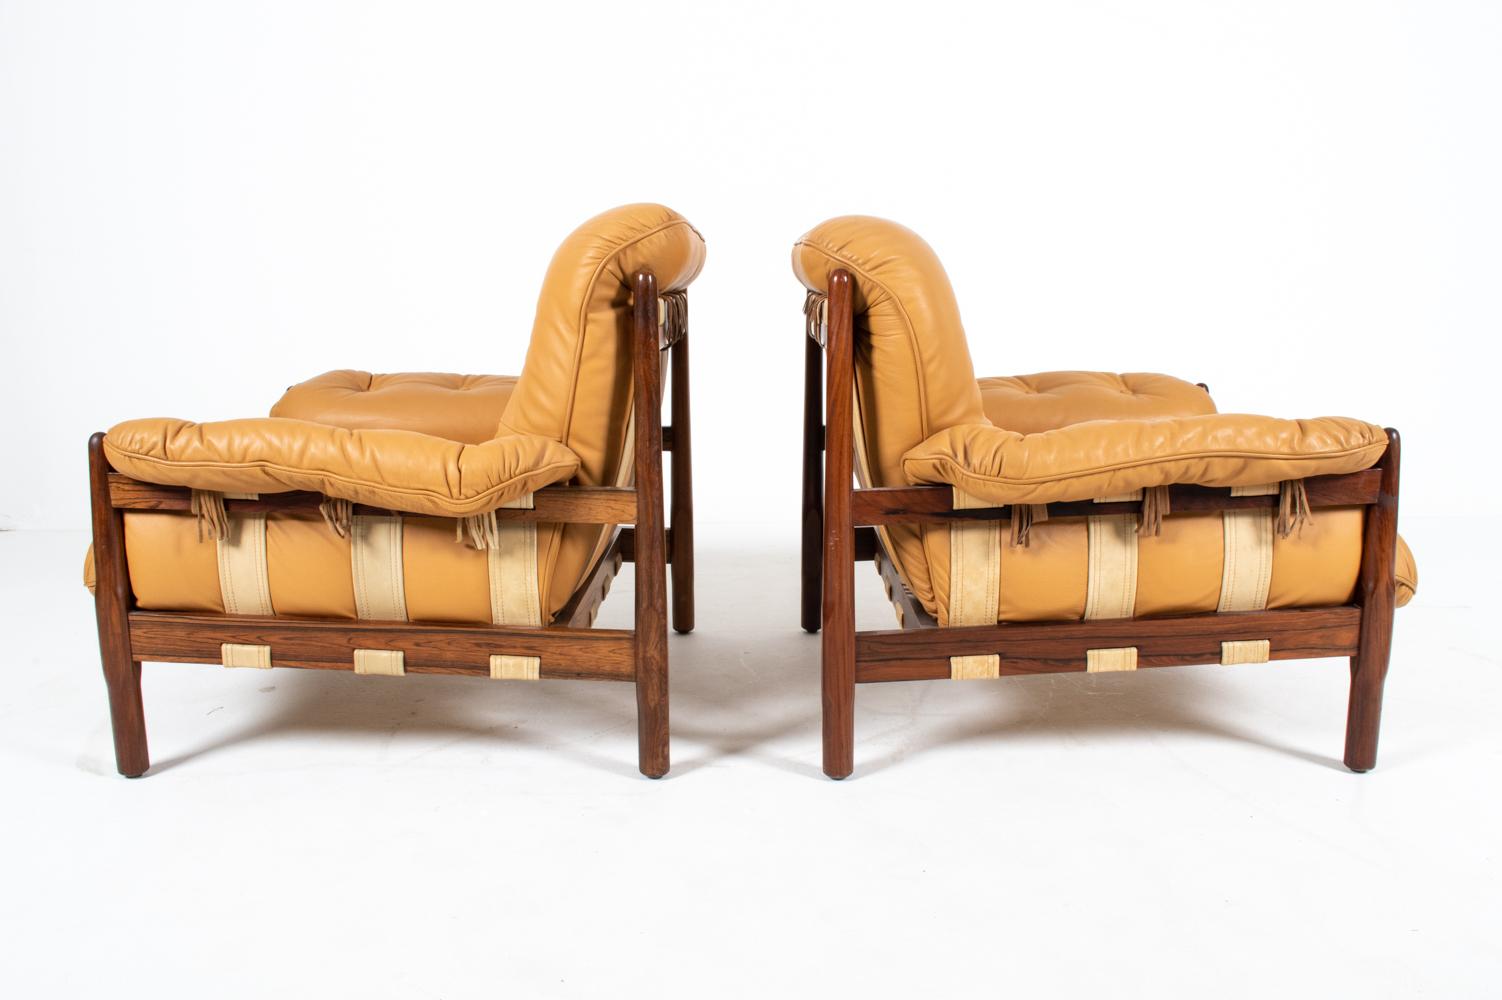 Pair of Brazilian Modernist Rosewood & Leather Easy Chairs, circa 1970s For Sale 4